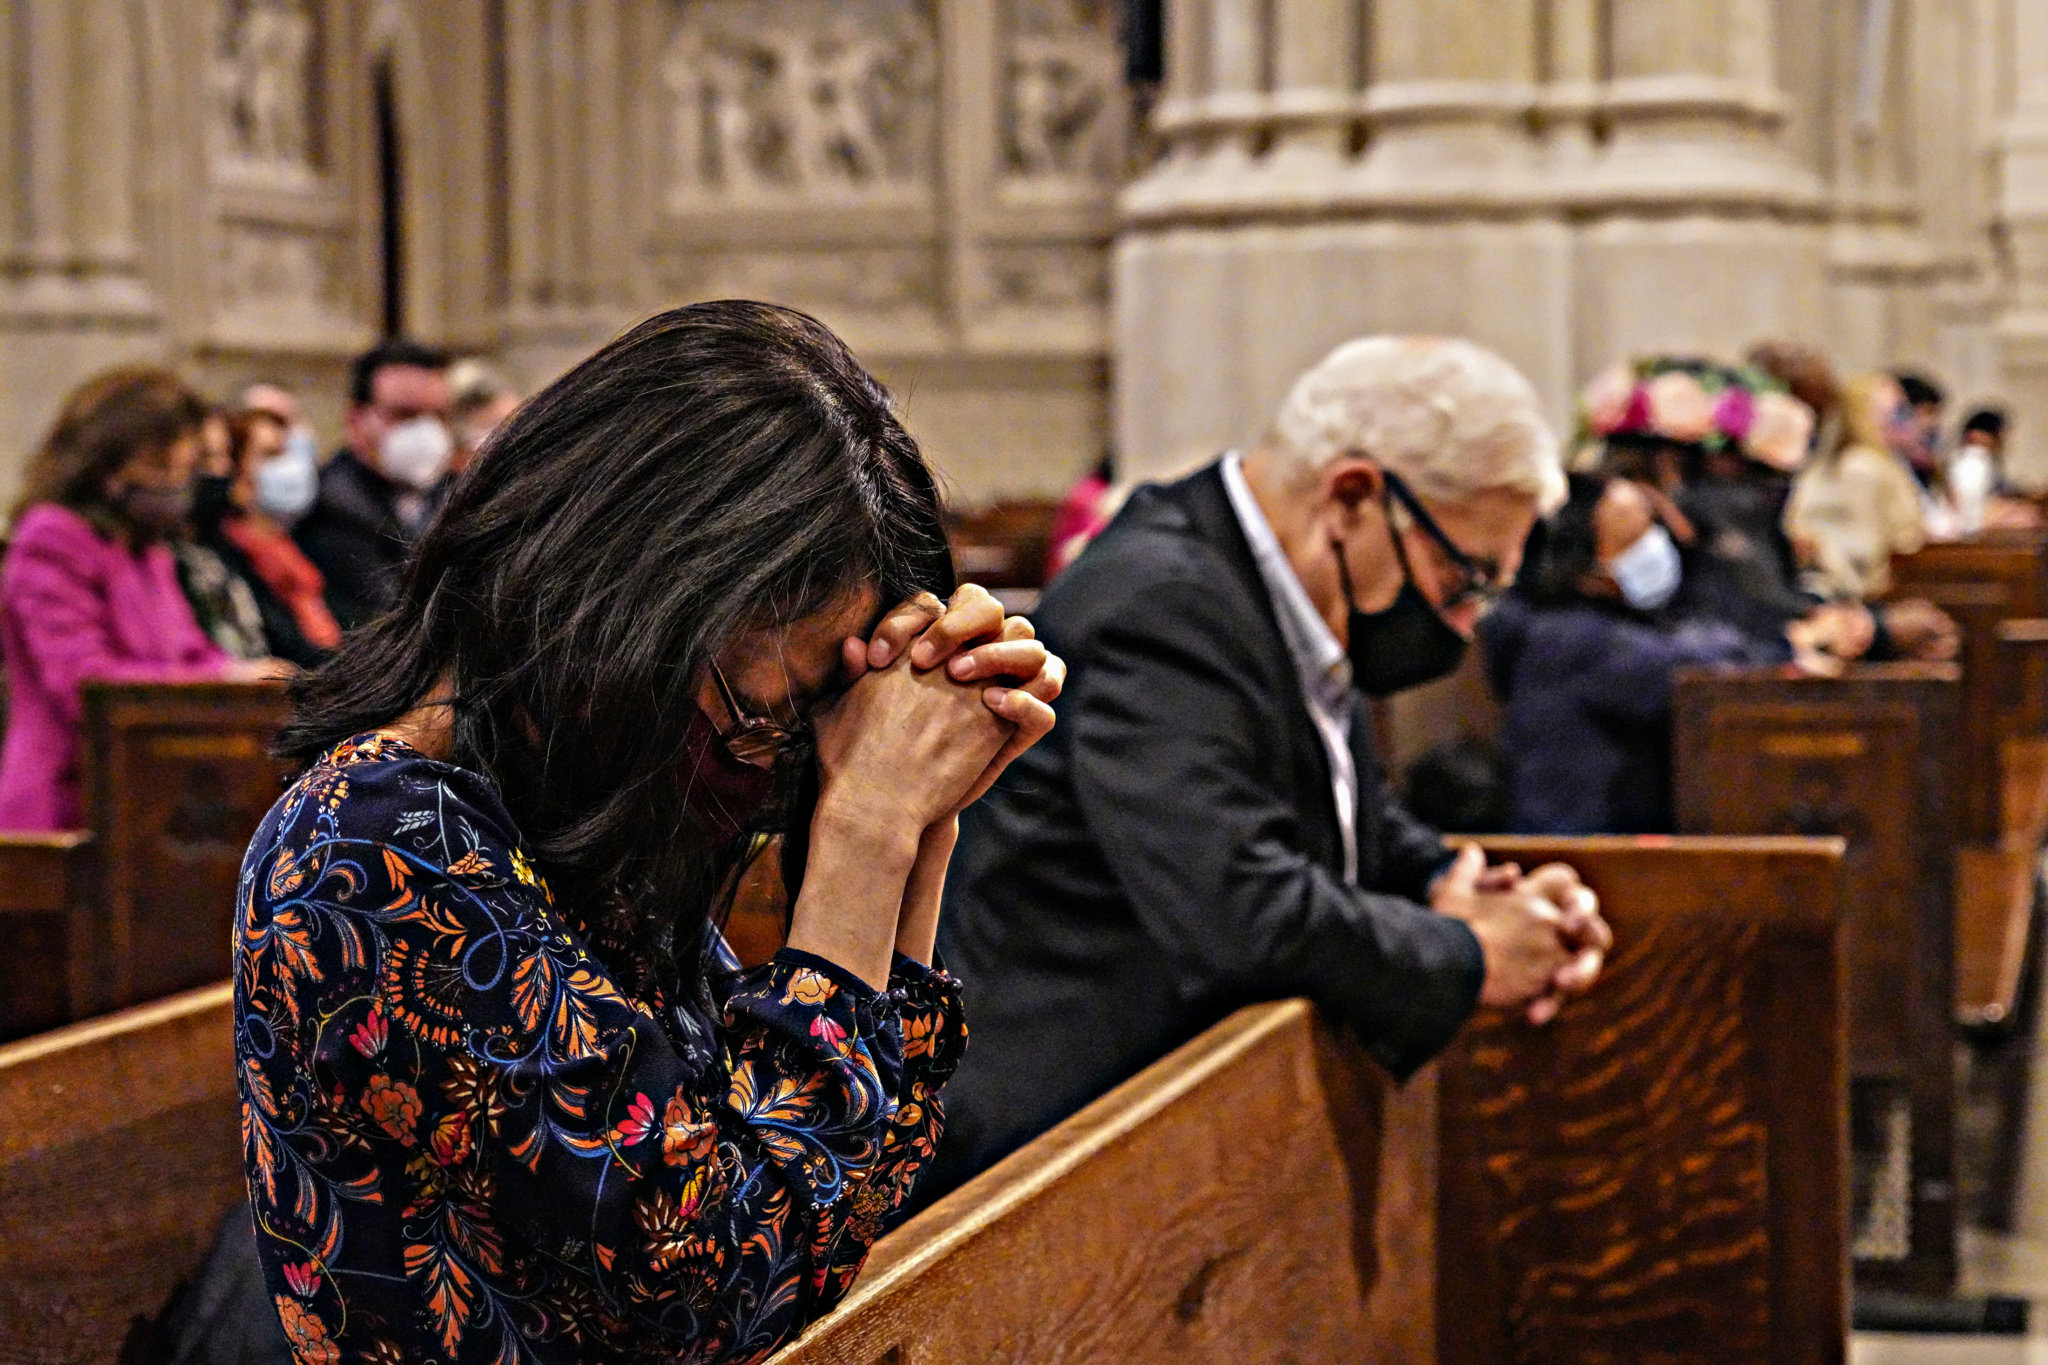 Easter mass is back at St. Patrick’s Cathedral amNewYork